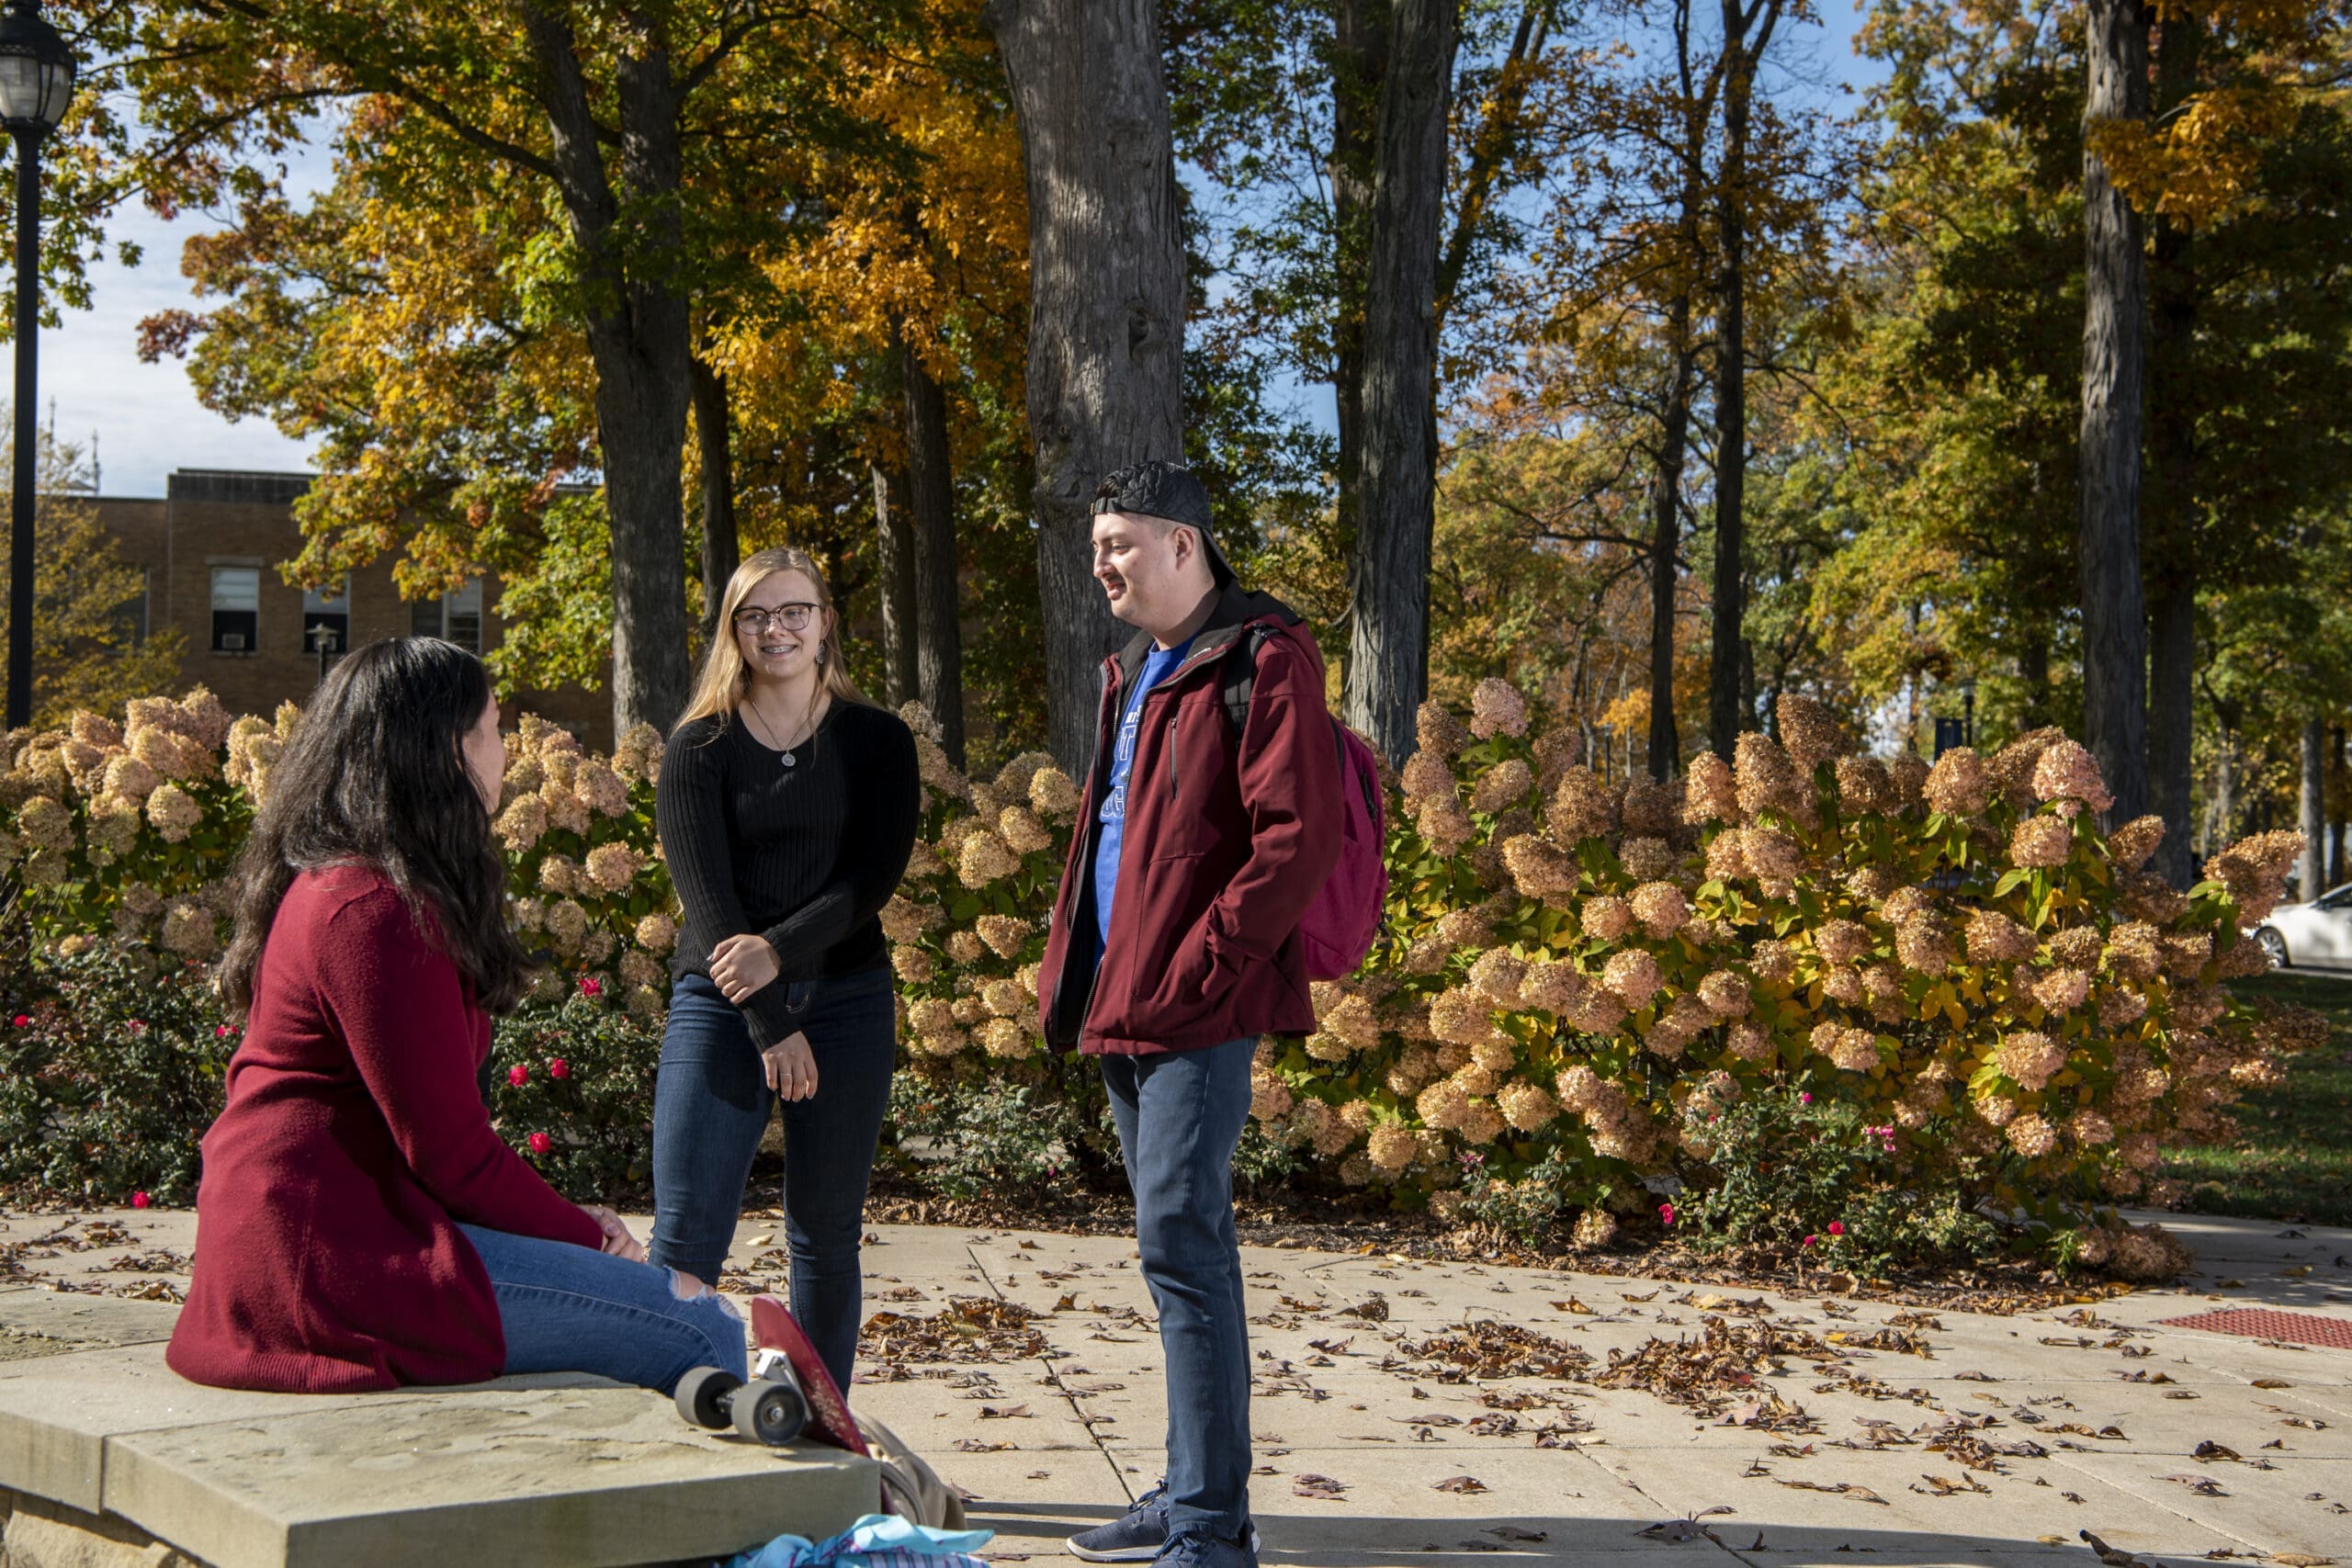 Students talking outside enjoying the fall weather on campus.